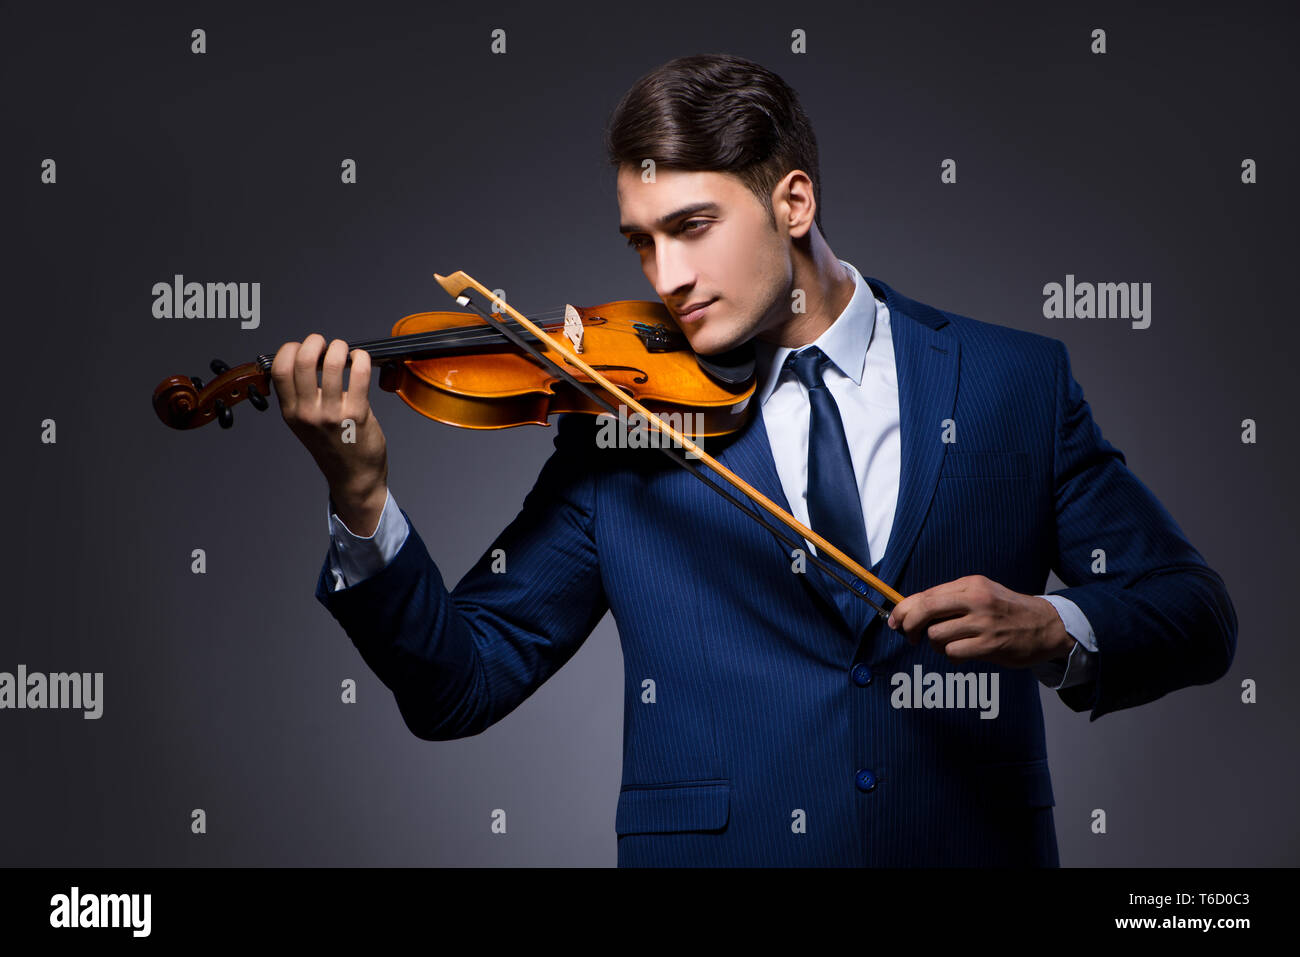 Young man playing violin in dark room Banque D'Images